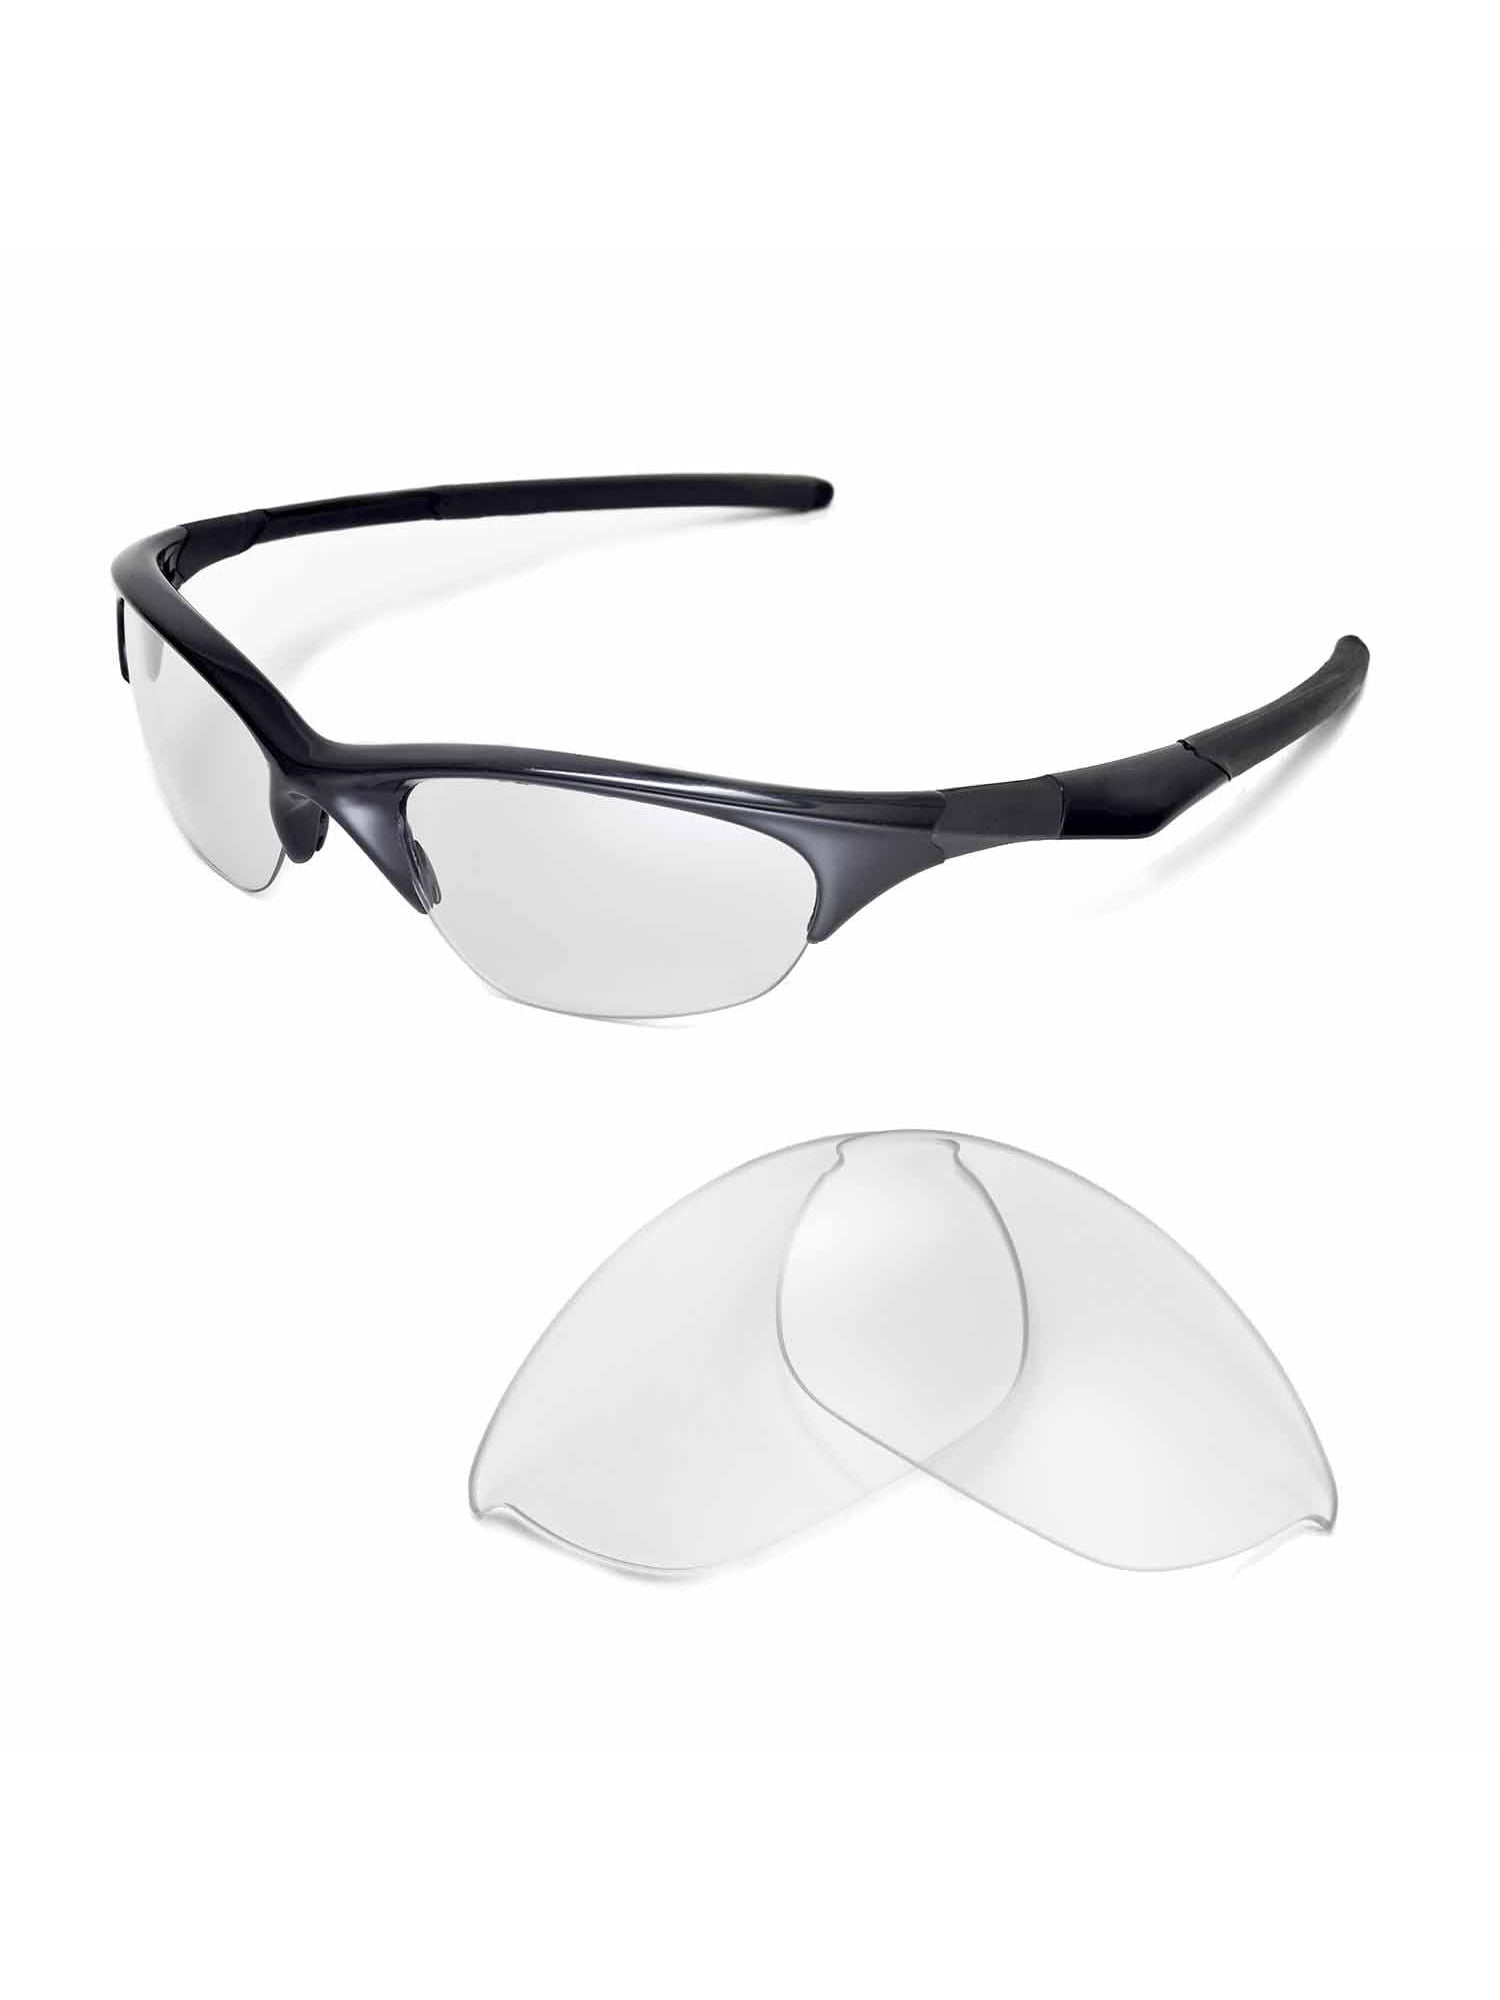 Walleva Clear Replacement Lenses for Oakley Half Jacket Sunglasses -  